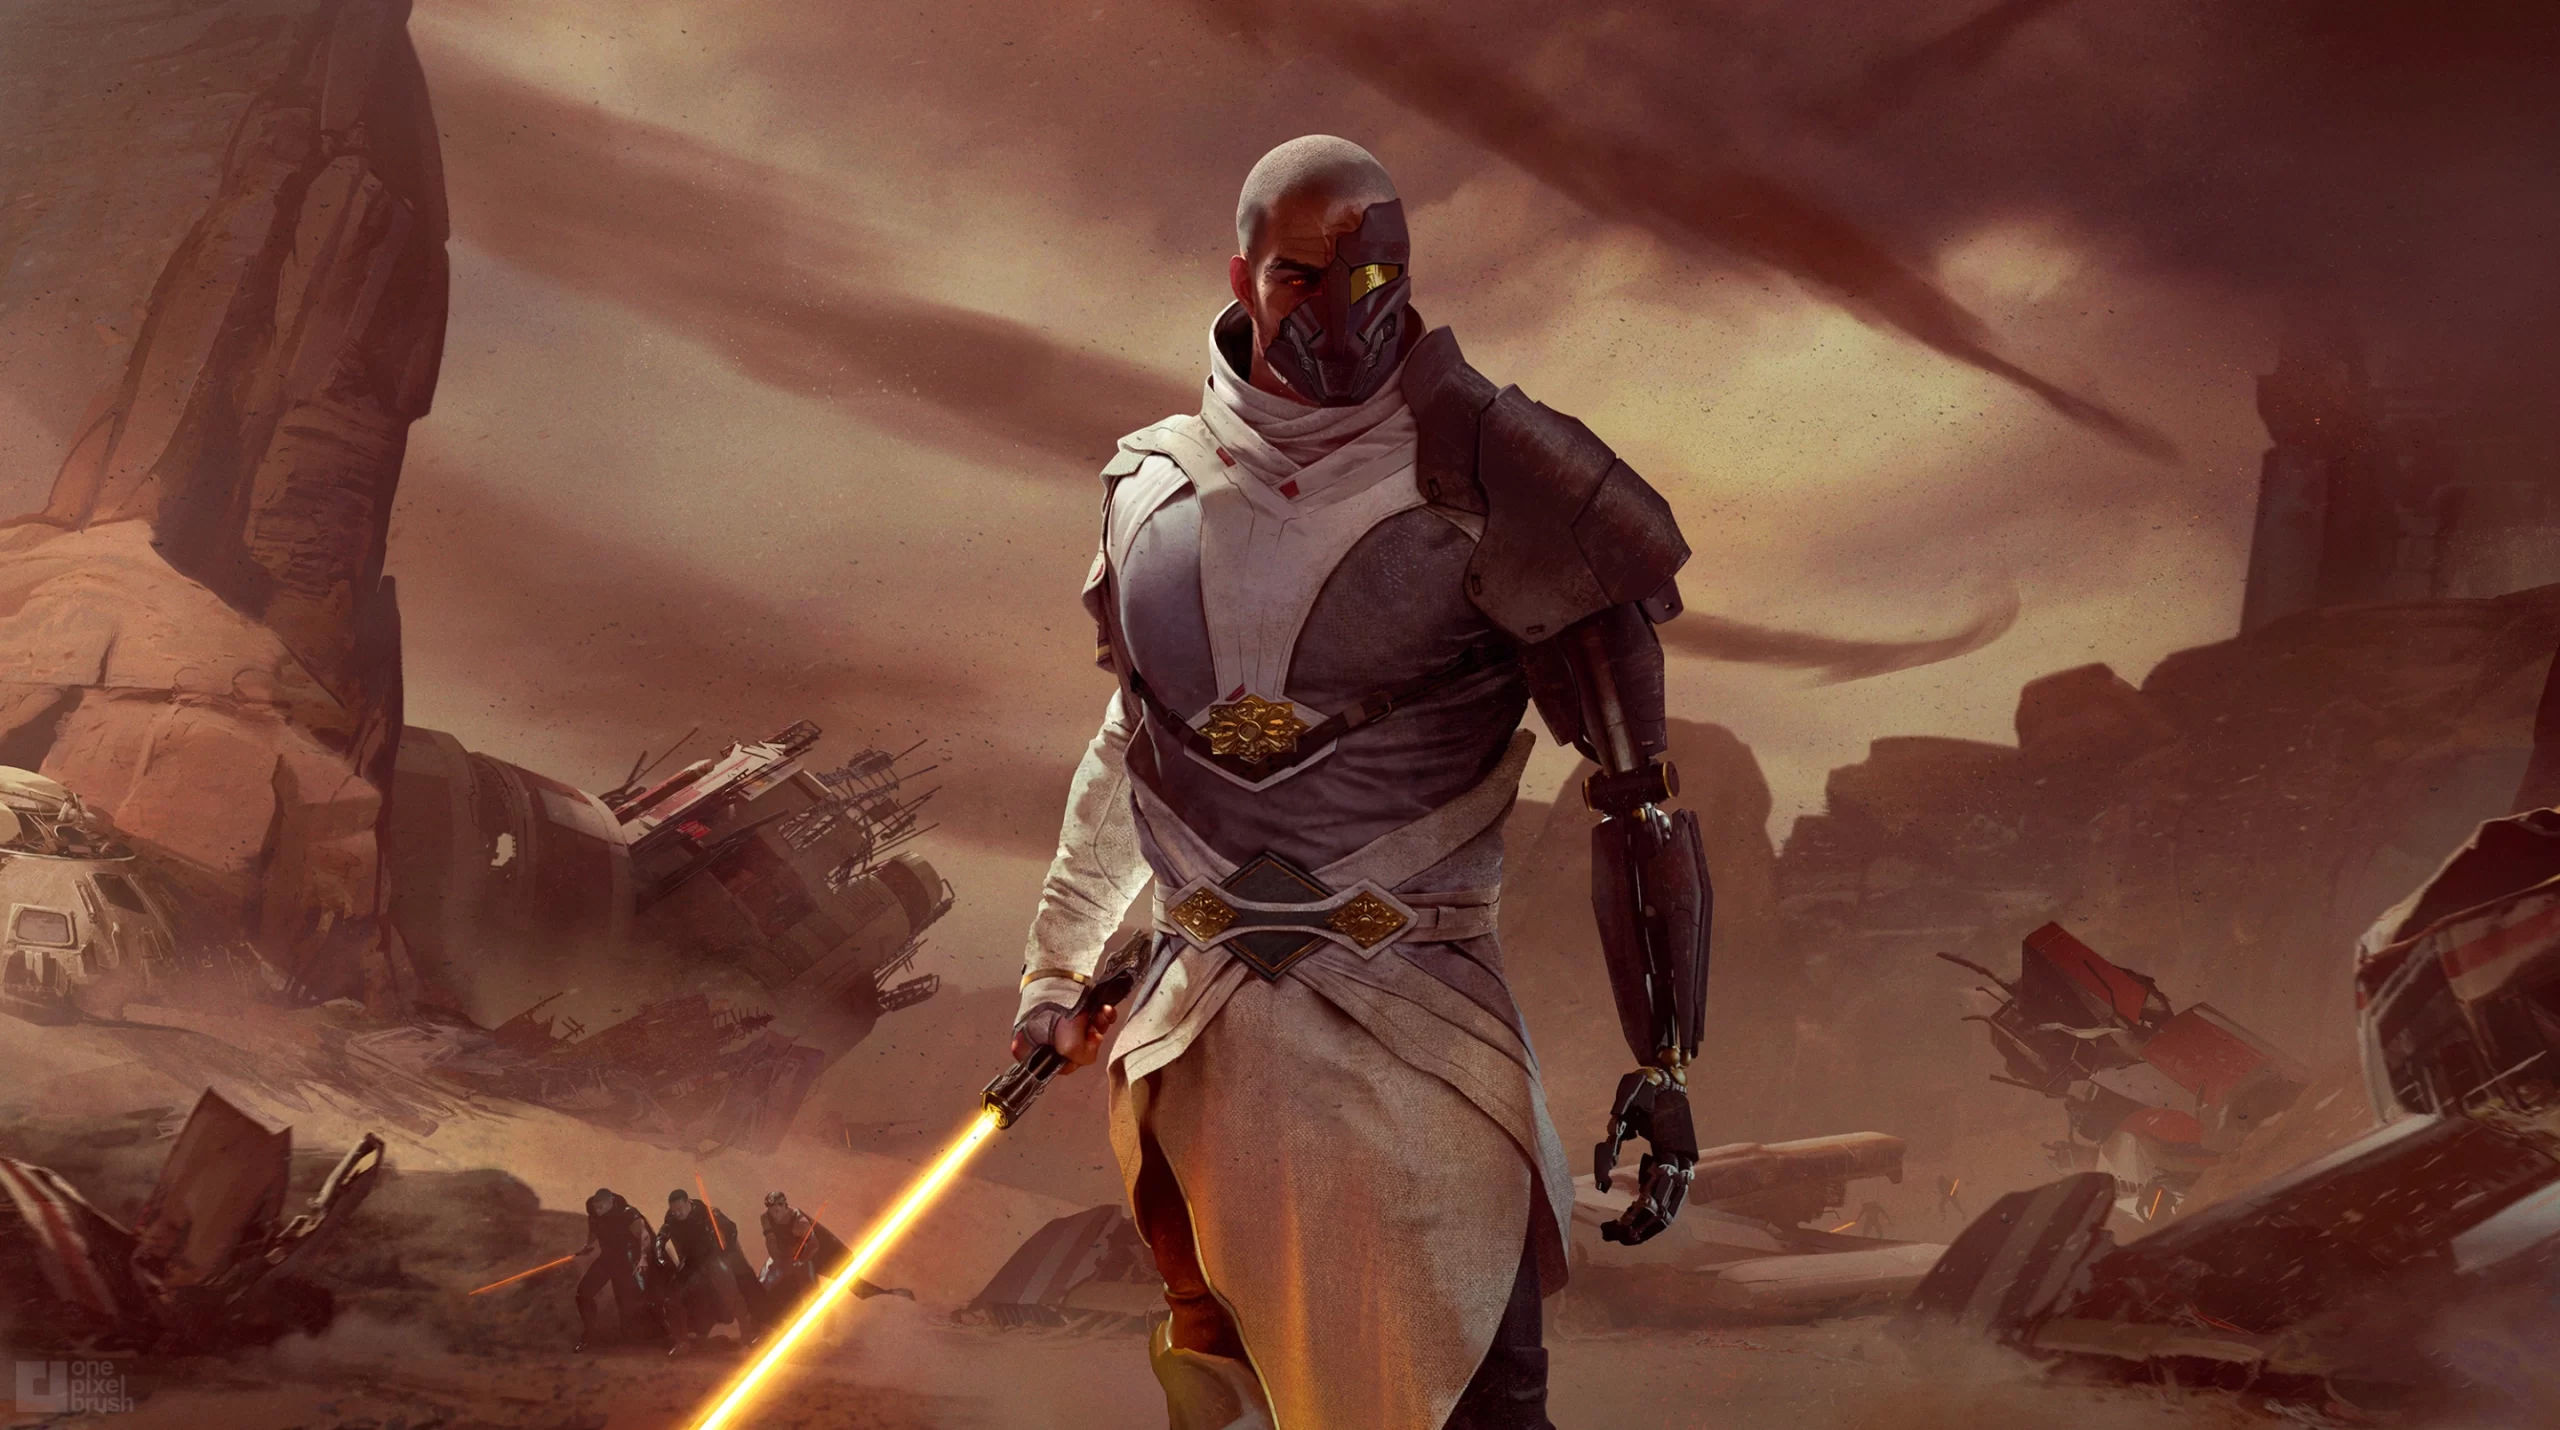 star-wars-video-game-movie-concept-art-soldier-character-design-2880x1609